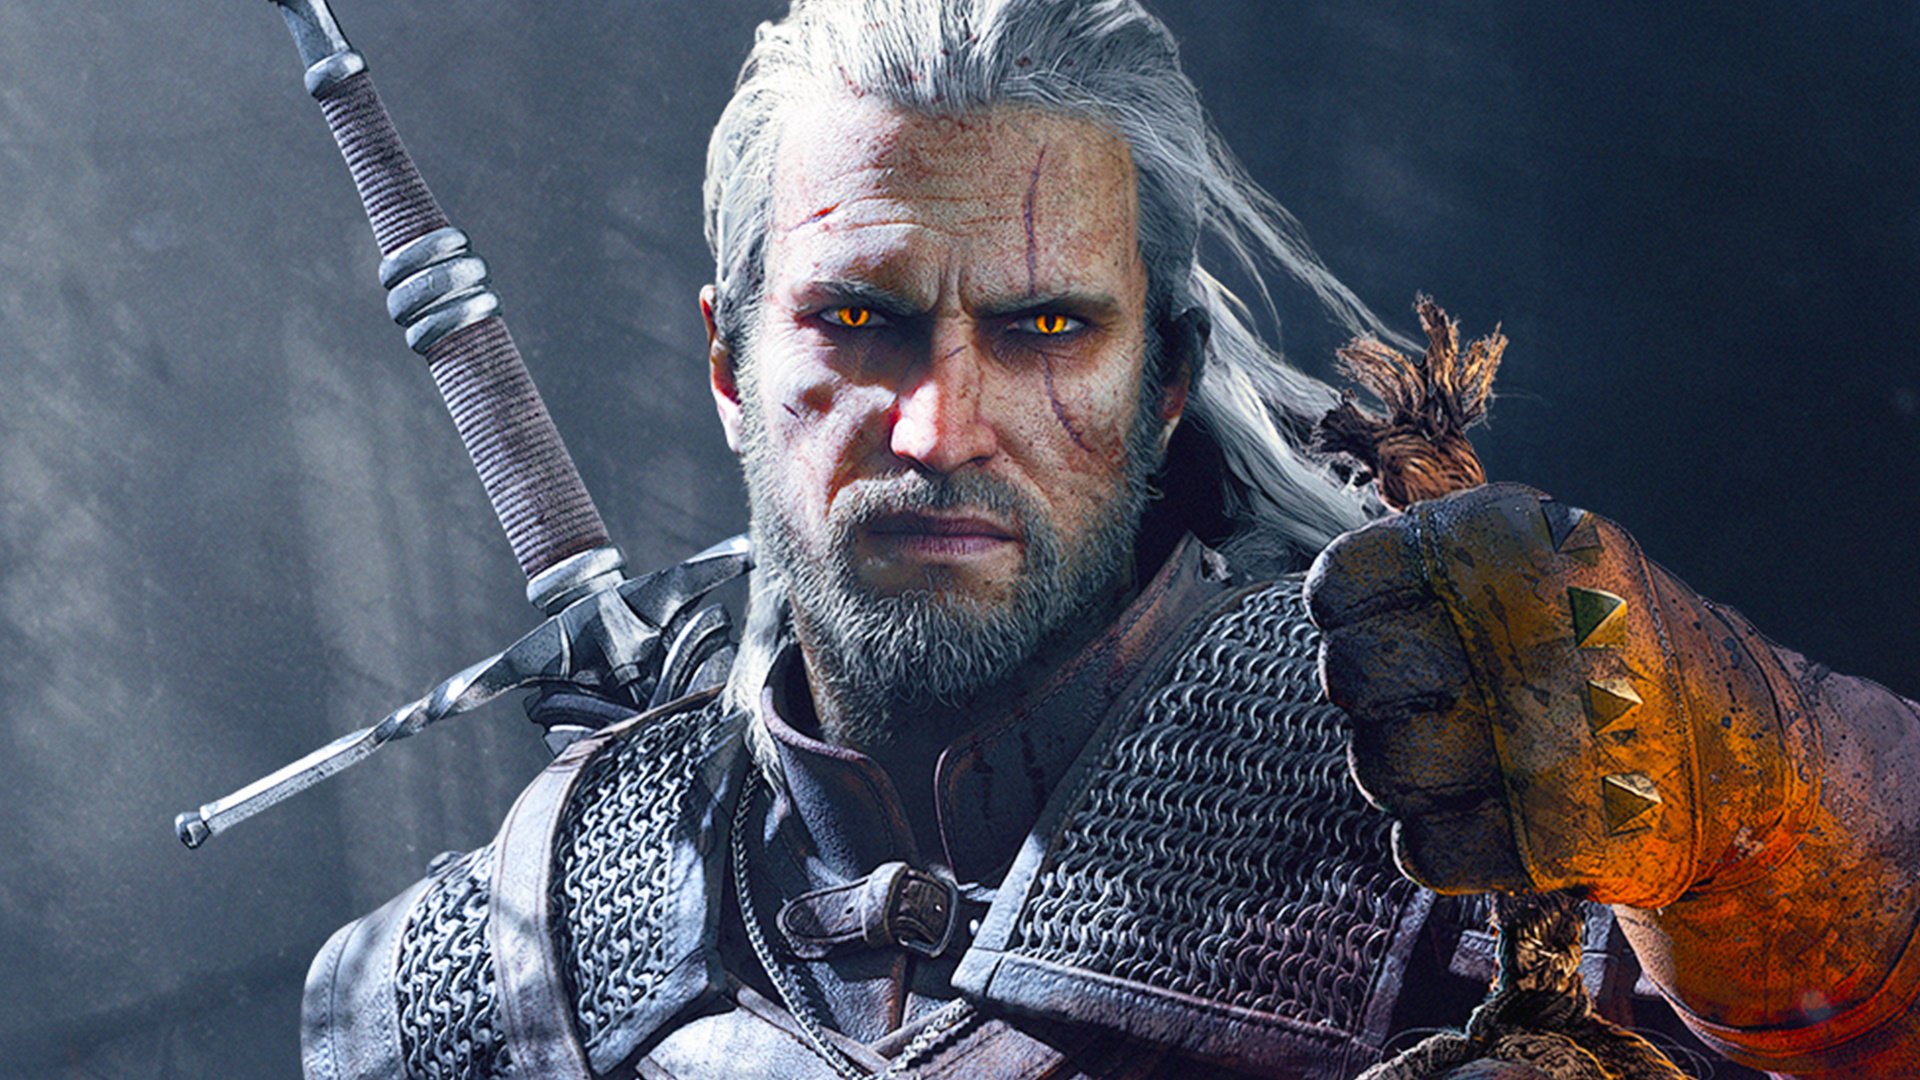 The Witcher Netflix Show Sparks Huge Player Resurgence for The Witcher ...
